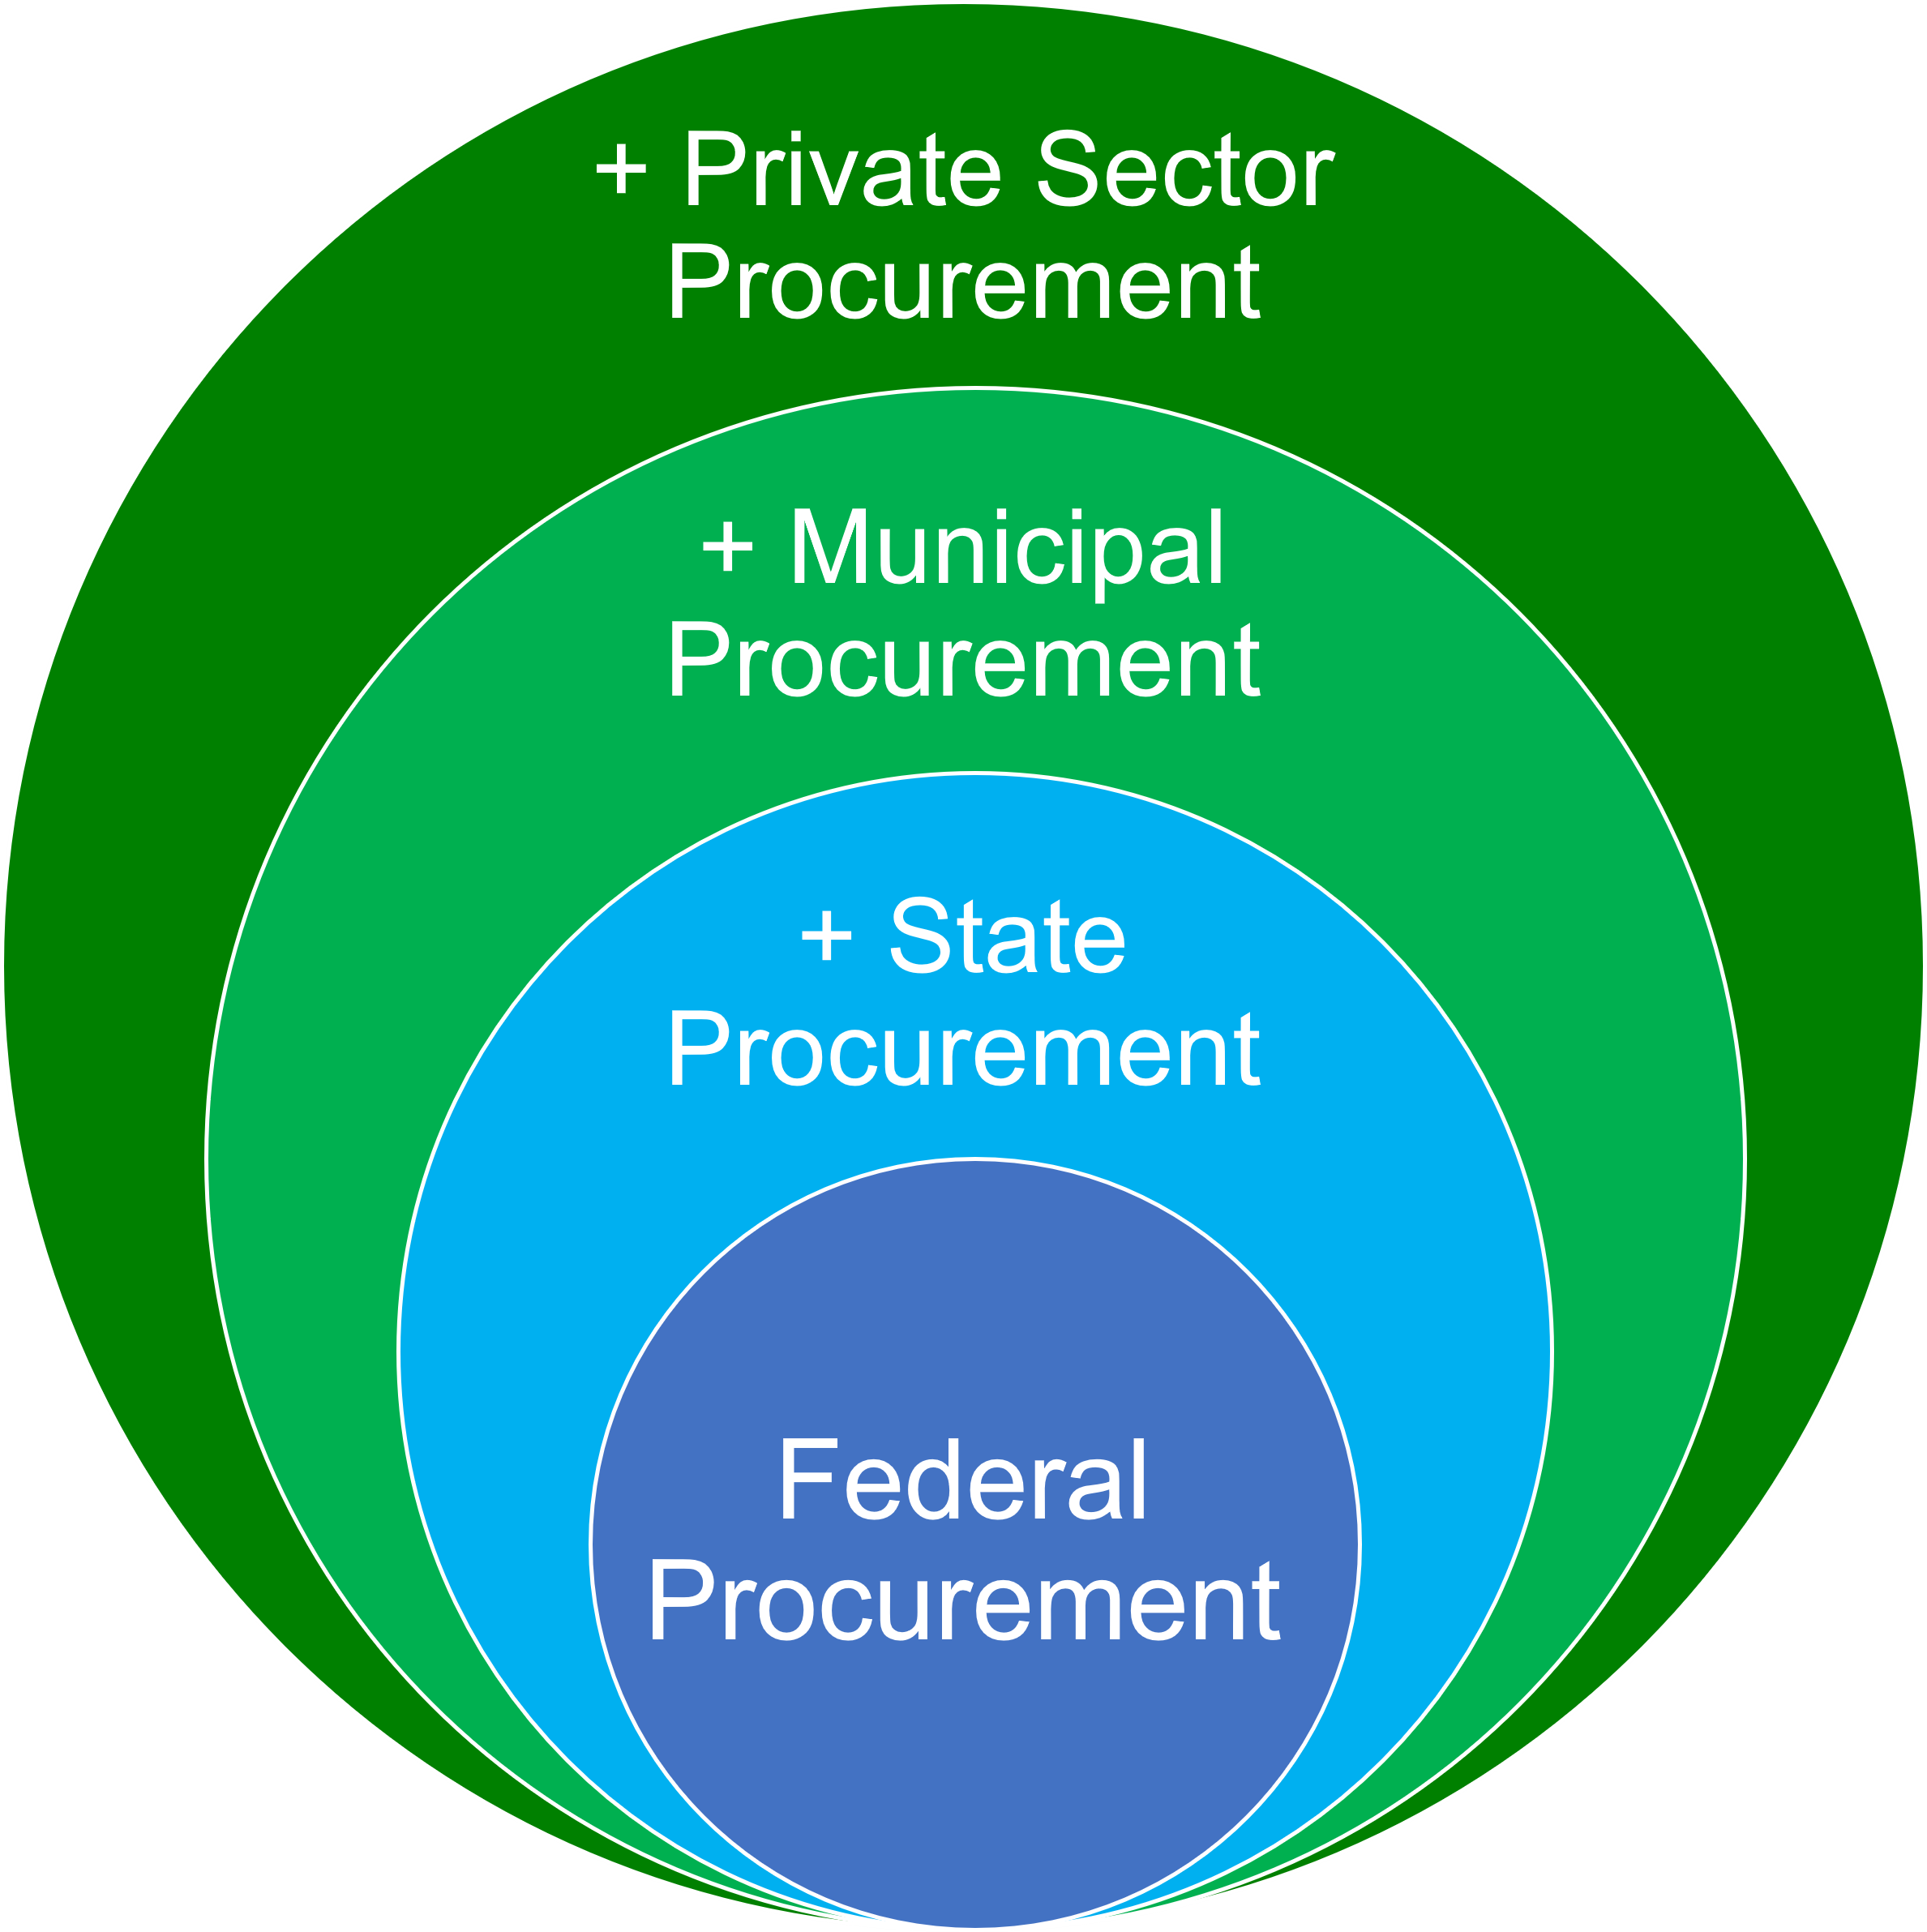 Concentric circle graphic. From inner to outer:  Federal procurement, State procurement, Municipal procurement, and Private Sector procurement